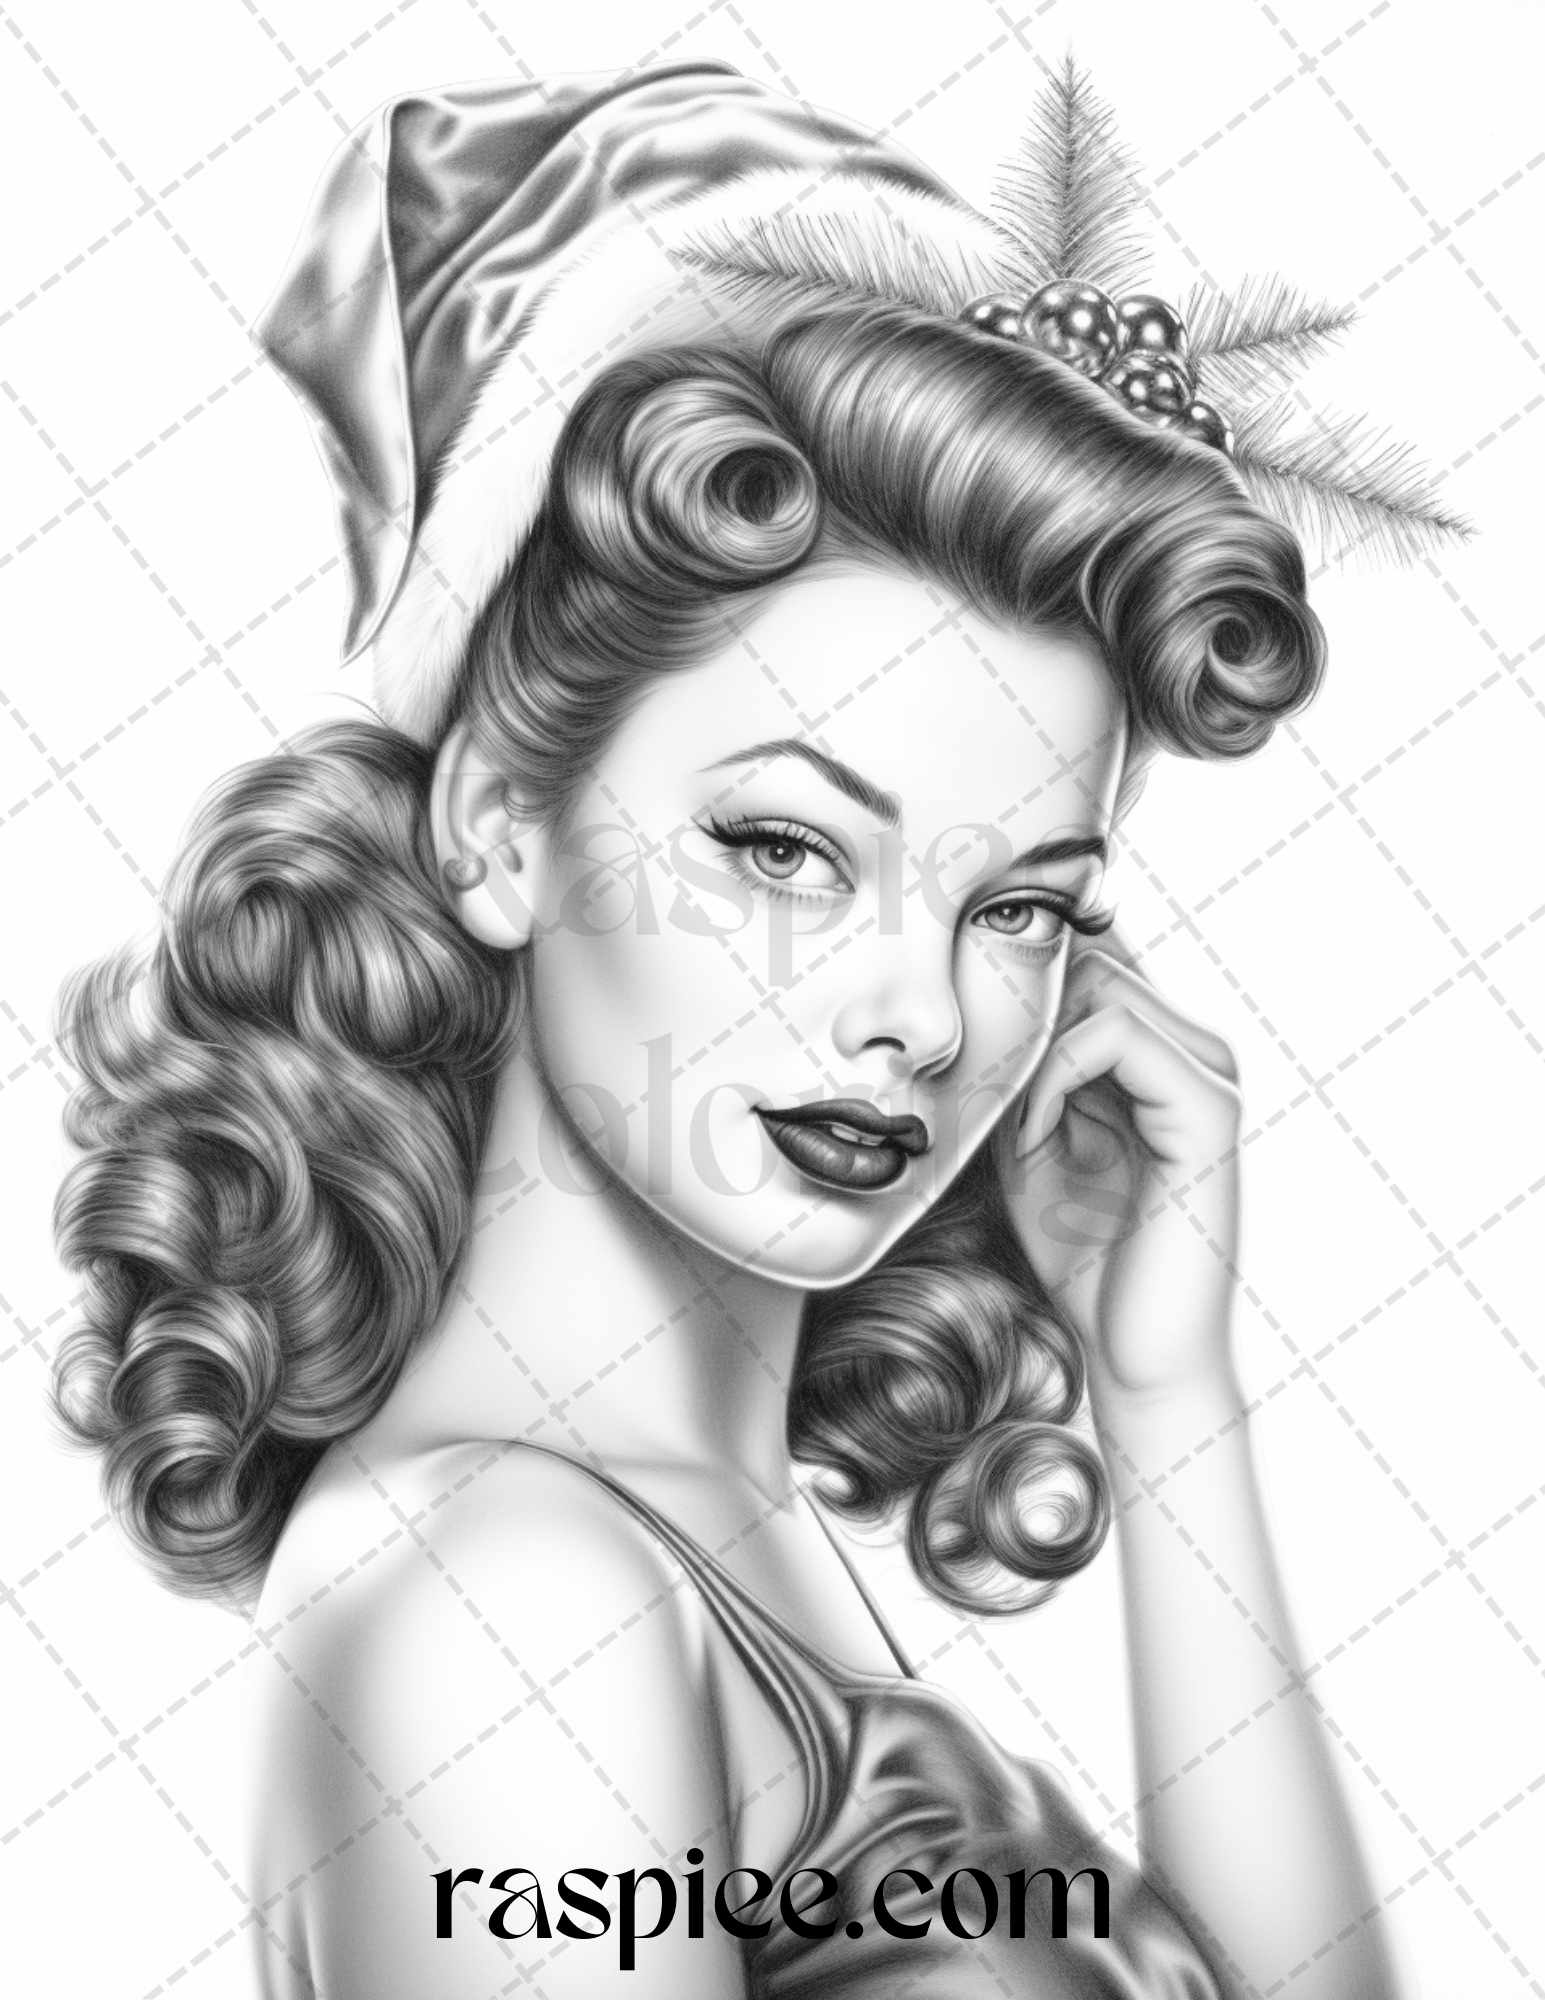 Vintage Christmas Pin Up Girls Coloring Page, Retro Pinup Girl Coloring Design, Vintage Style Holiday Coloring, Potrait Coloring Pages for Adults, Festive Adult Coloring Page, Printable Adult Coloring Sheet, Retro Xmas Coloring Pages, Grayscale Coloring for Adults